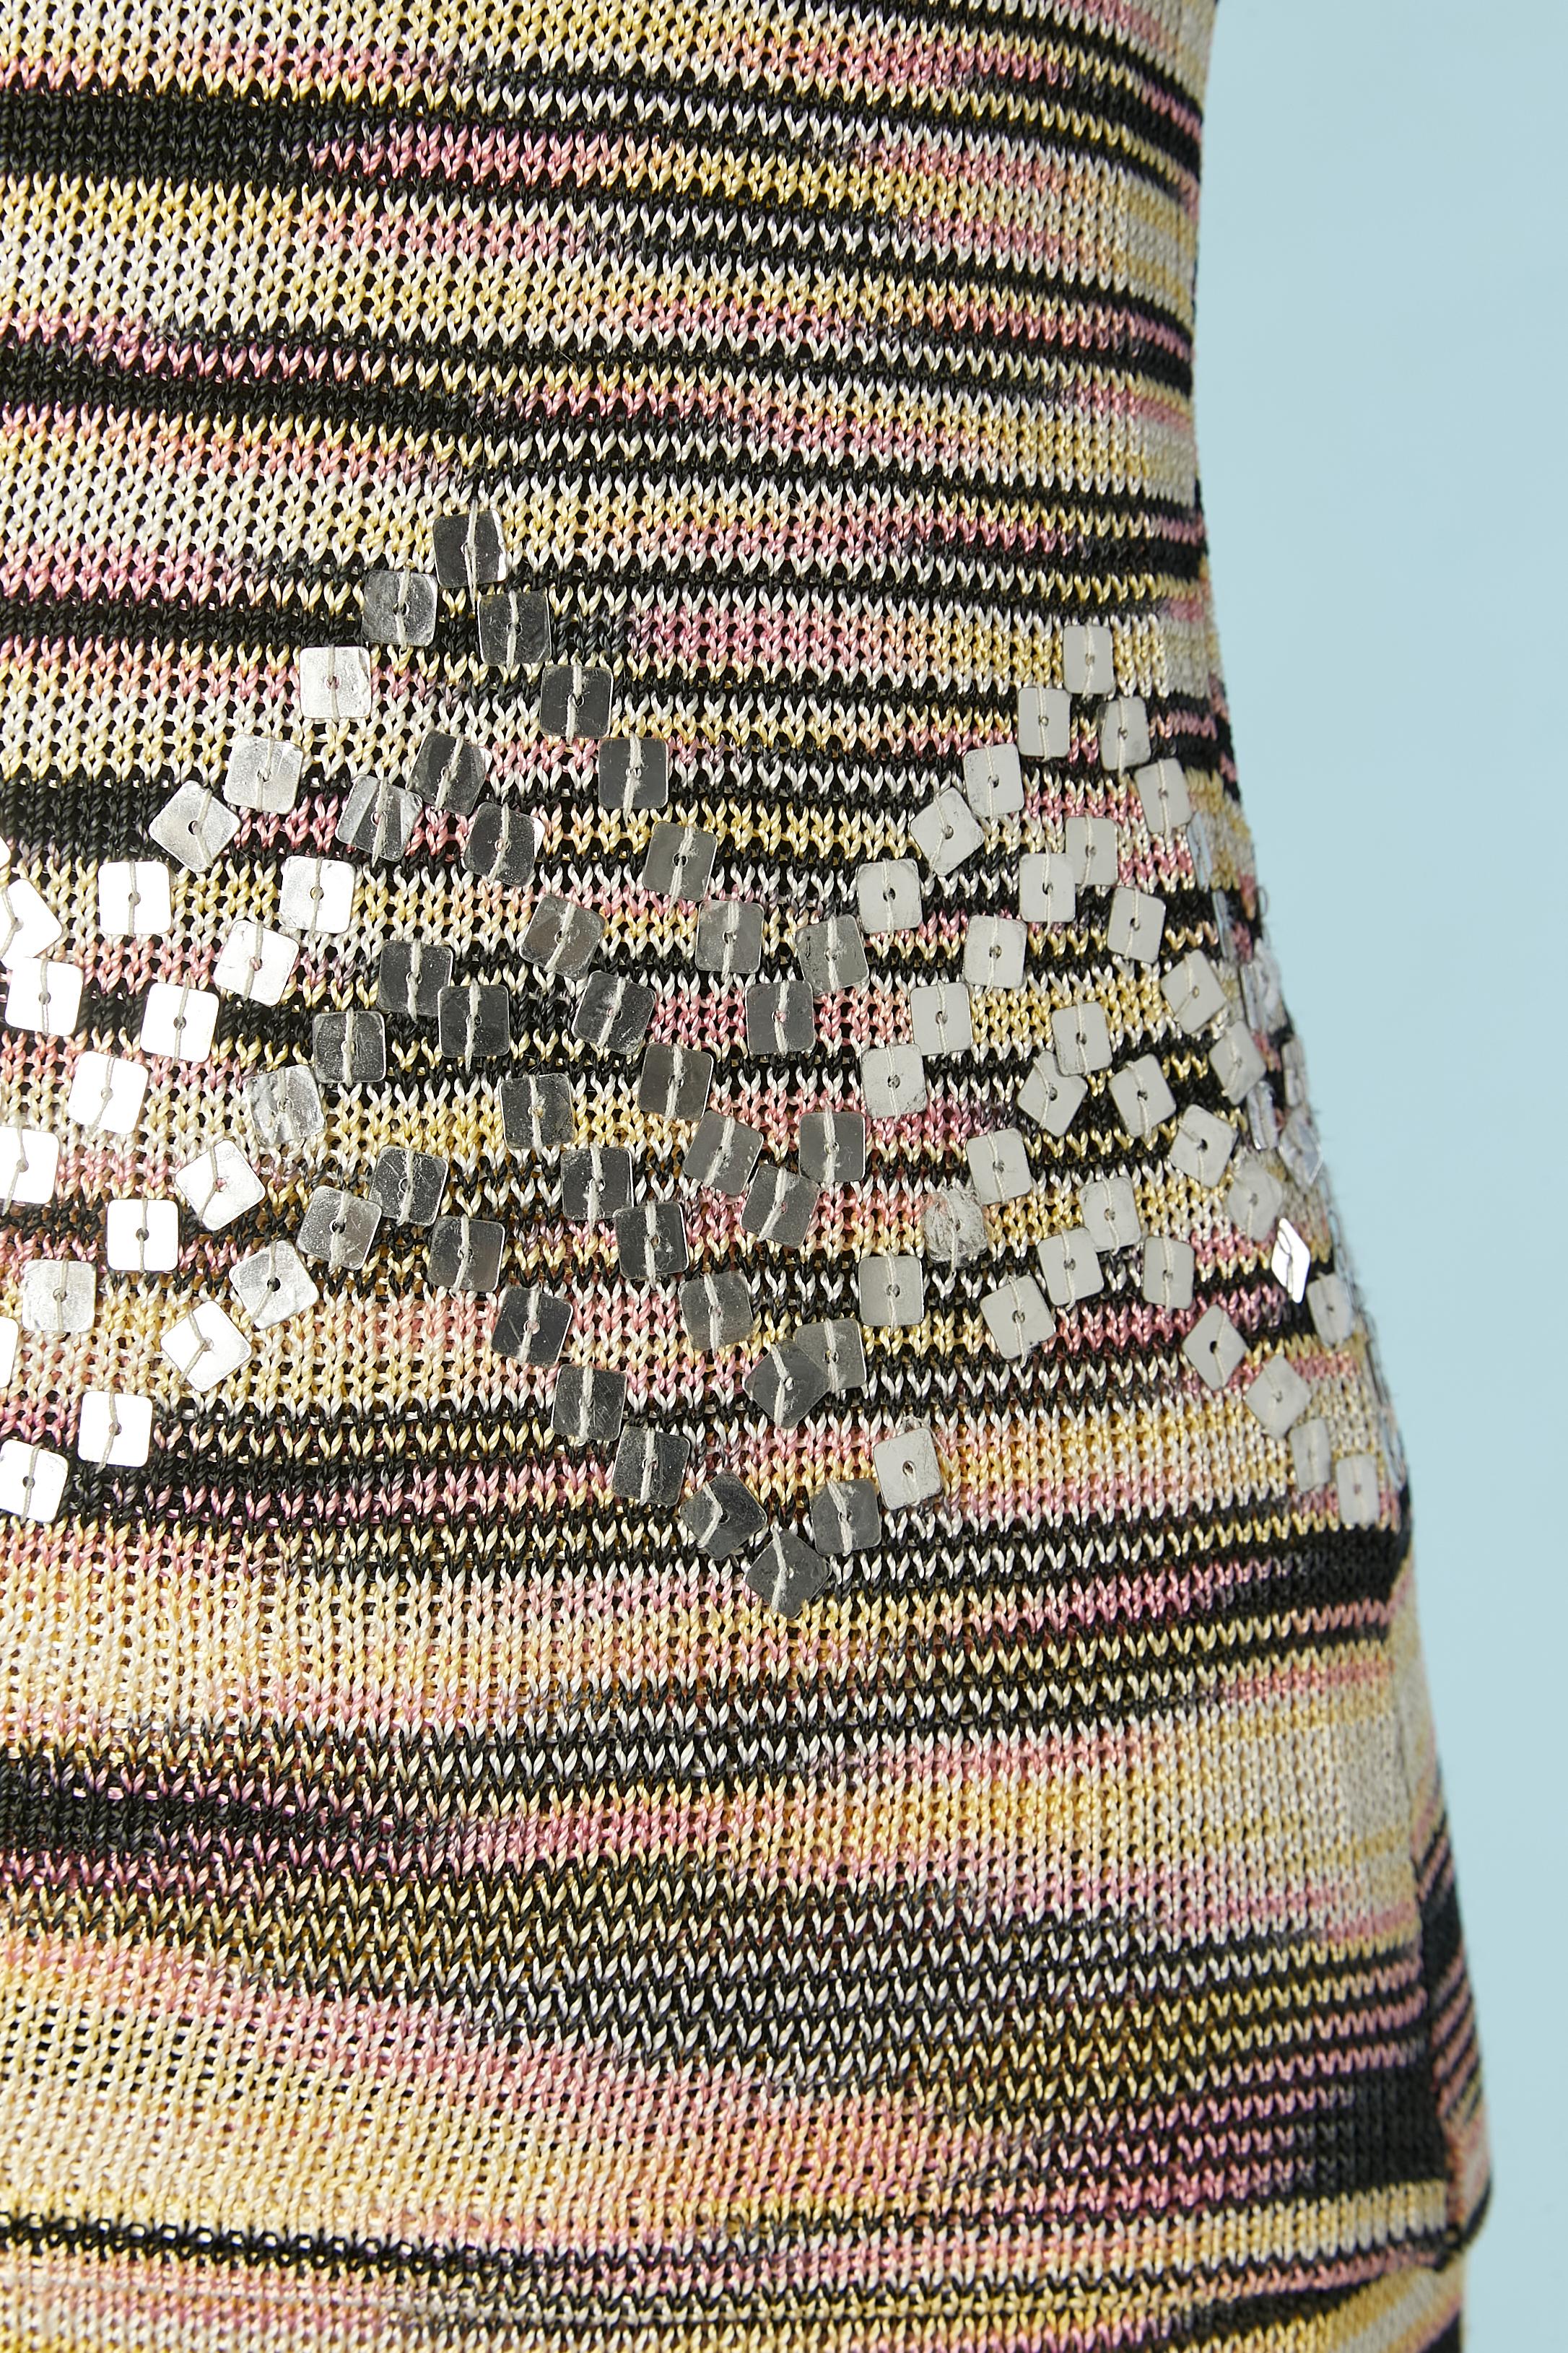 Tank top and skirt ensemble in rayon knit with sequin embellishment M Missoni  In Excellent Condition For Sale In Saint-Ouen-Sur-Seine, FR